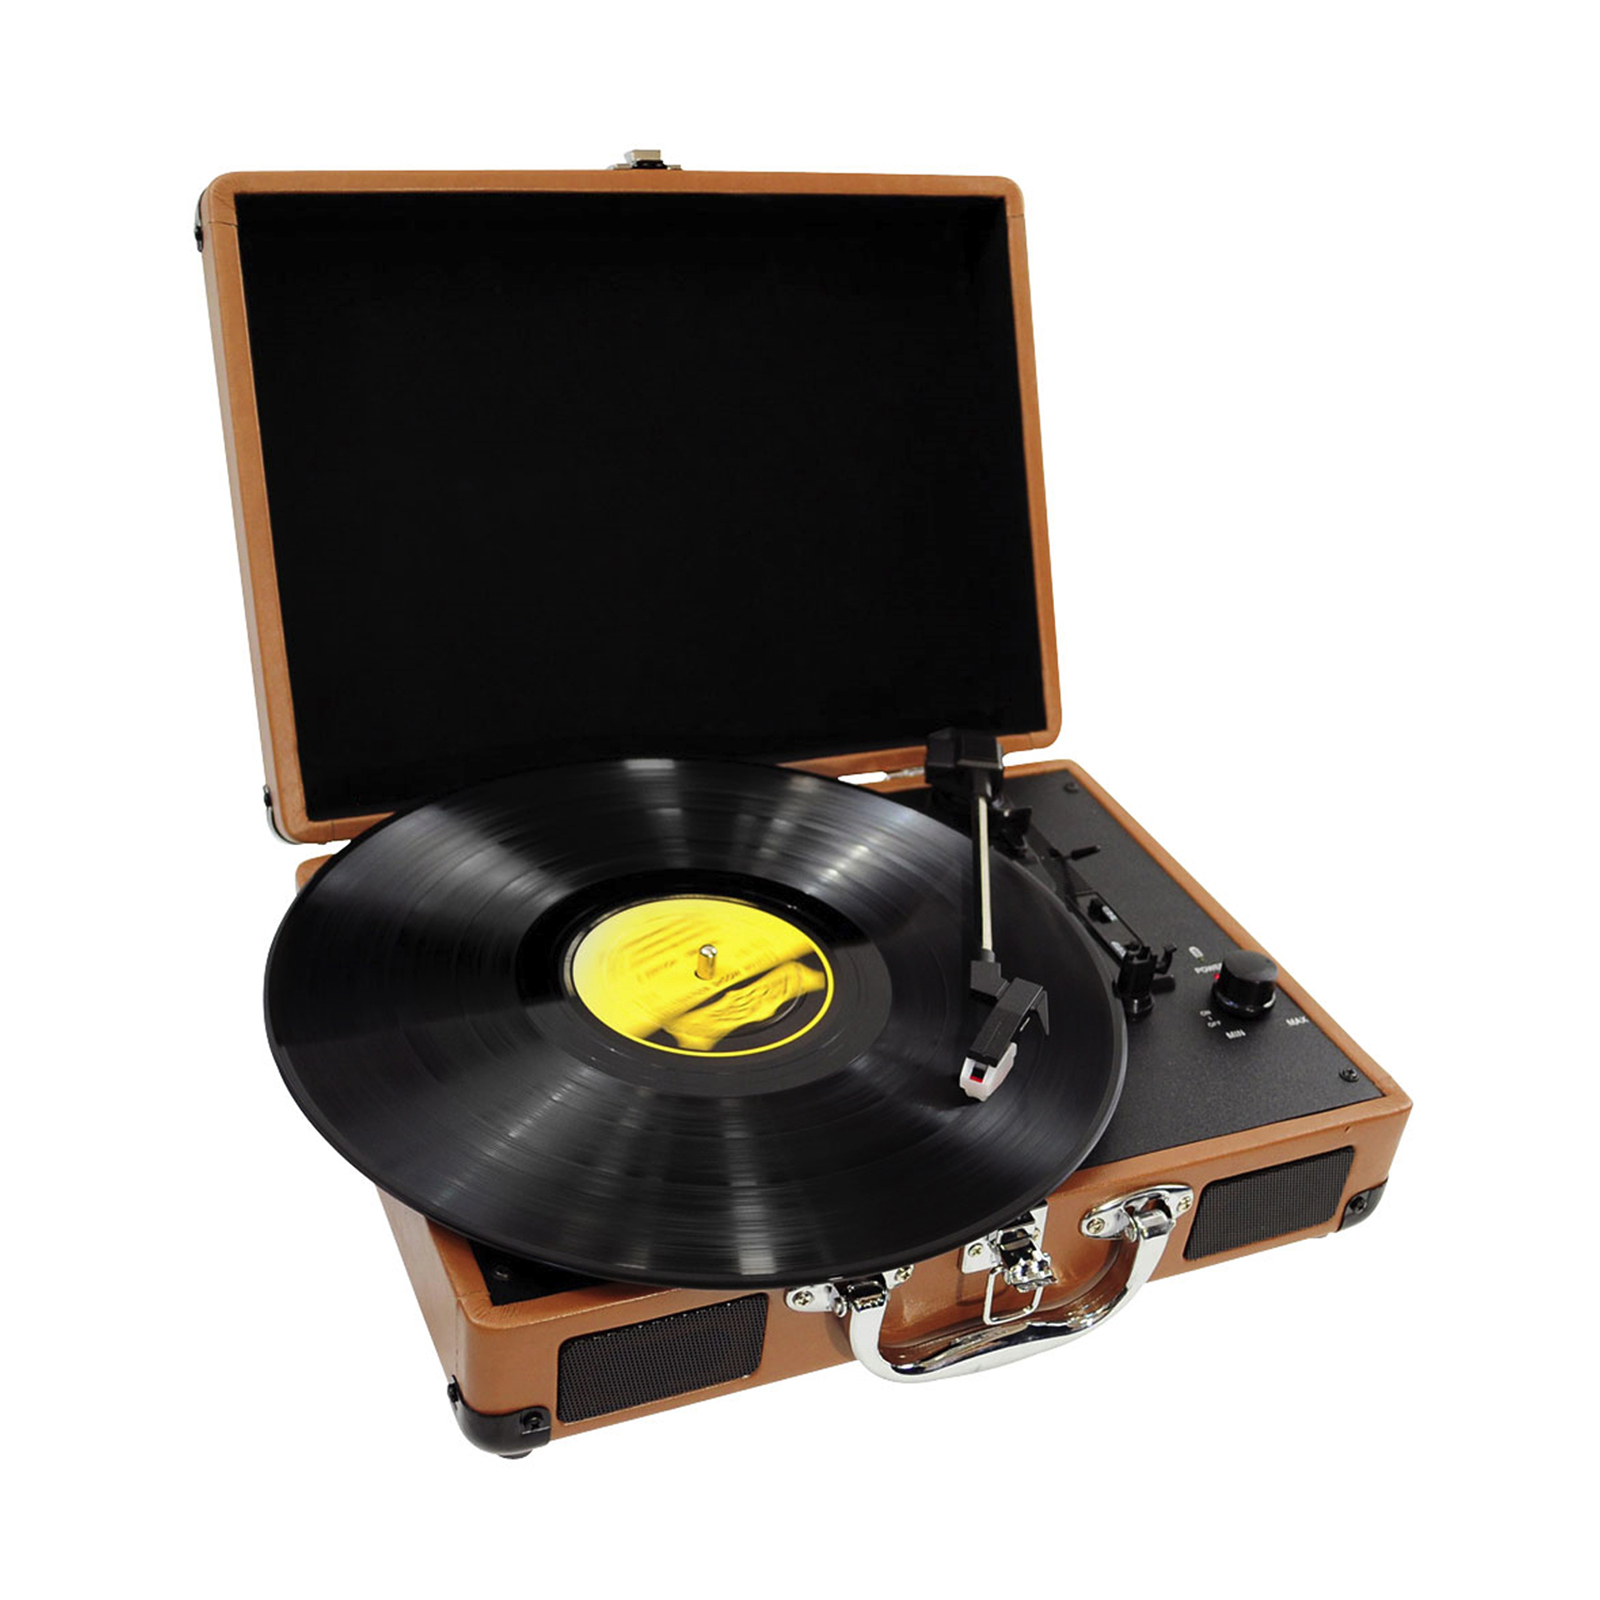 Pyle 97076386M Retro Belt-Drive Turntable with USB-to-PC Connection